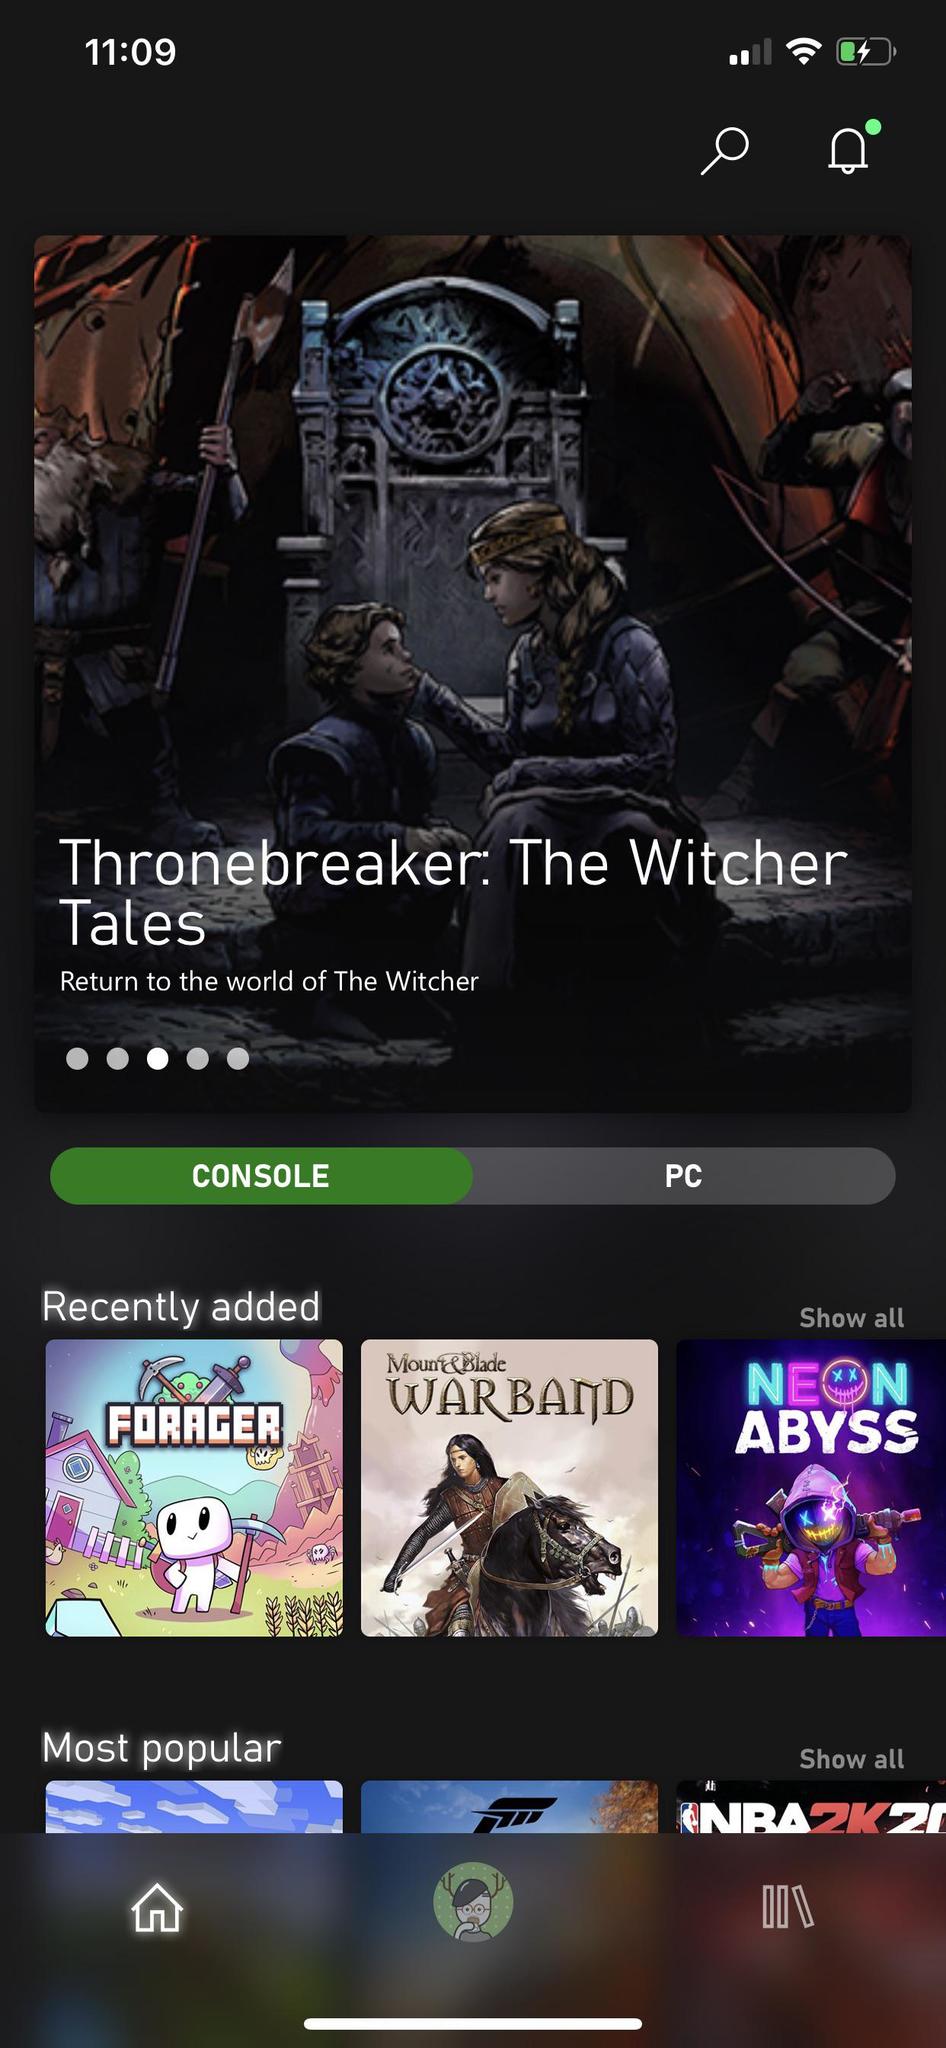 Xbox Game Pass app gets new layout on iOS | Windows Central